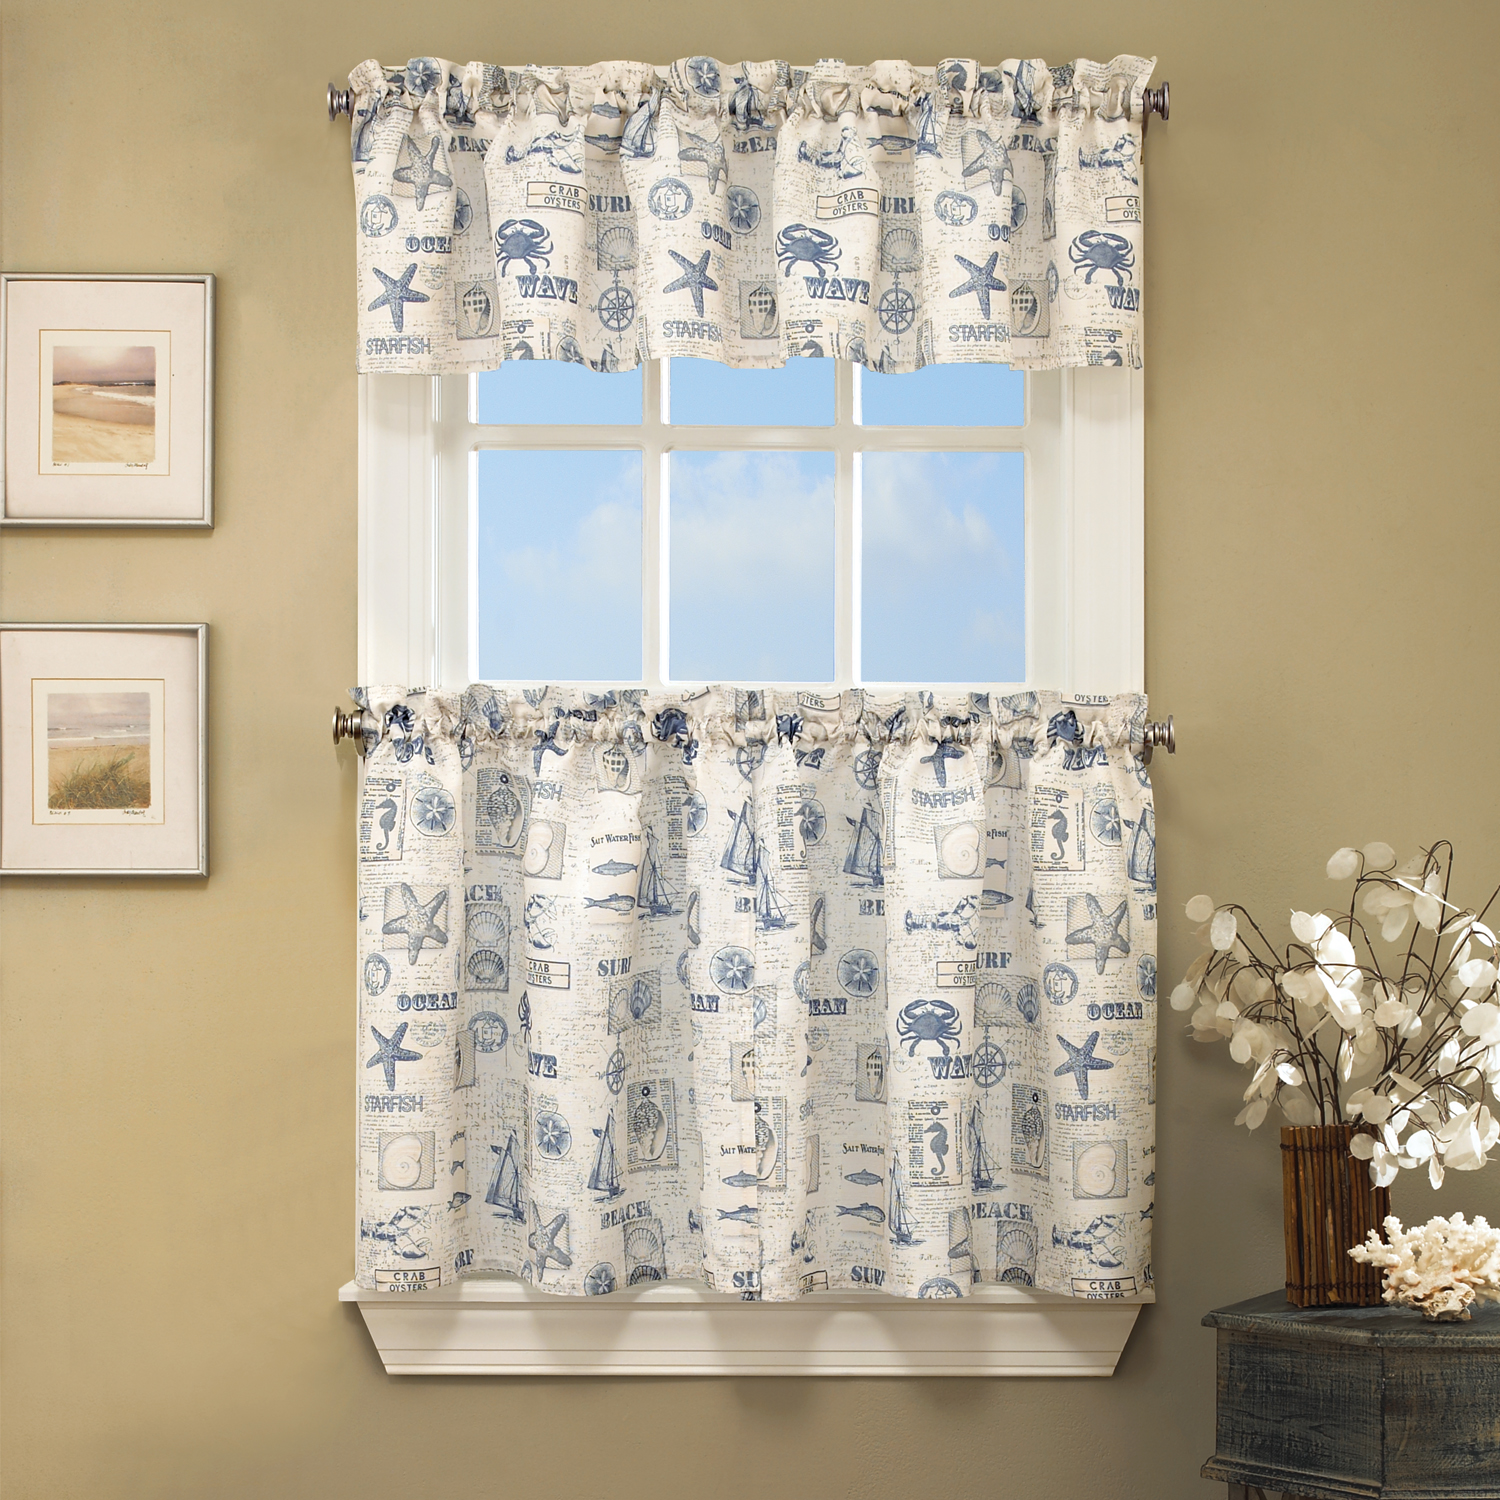 By The Sea Printed Ocean Beach Images Kitchen Curtains Tiers Or Valance Ebay